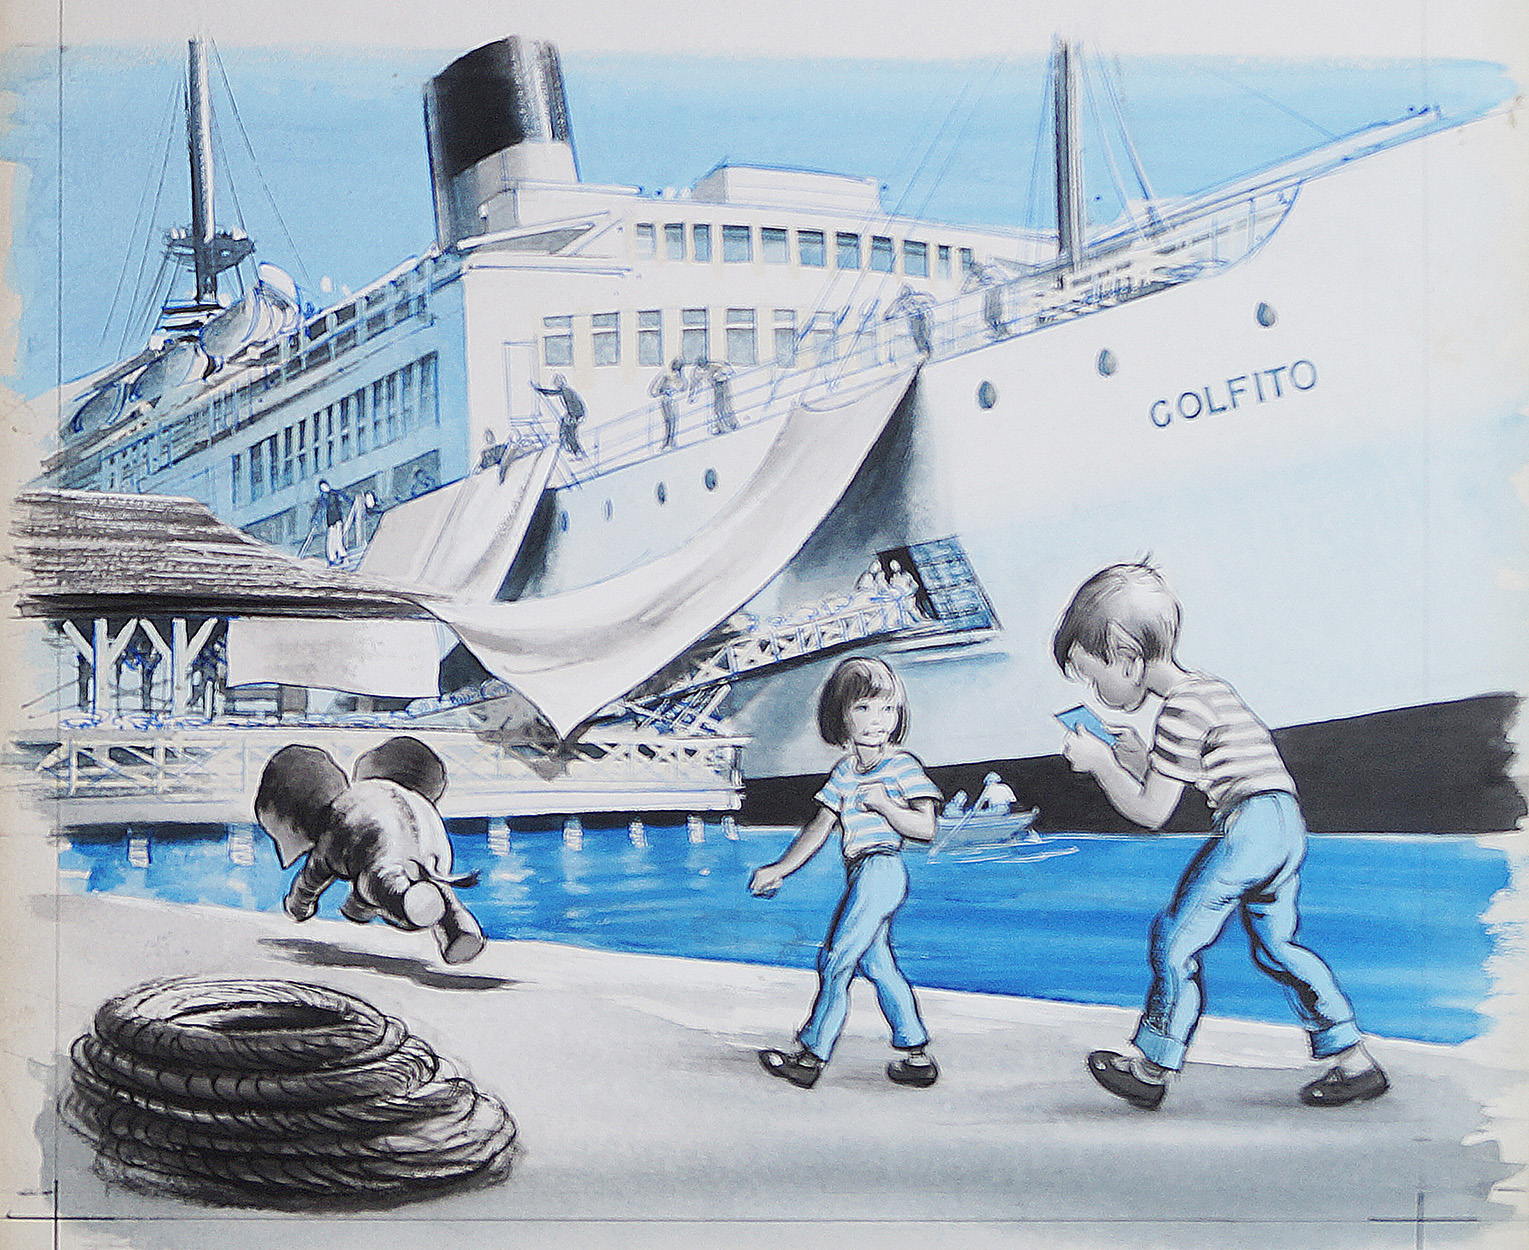 TSS Golfito-The Banana Boat (Original) art by Wee Willie Winkie (Worsley) at The Illustration Art Gallery